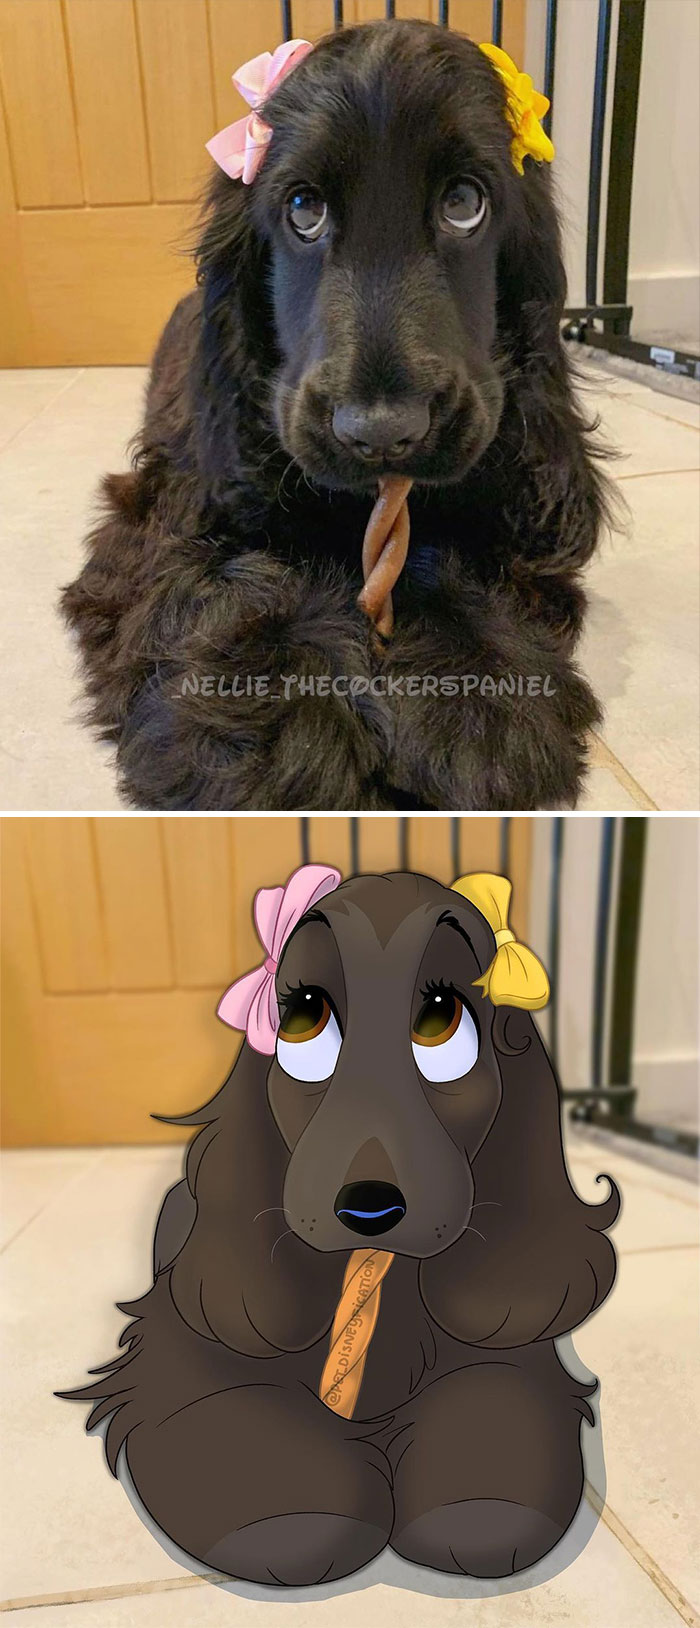 People Send Pics Of Their Pets To This Artist And She Disneyfies Them (30 New Pics)